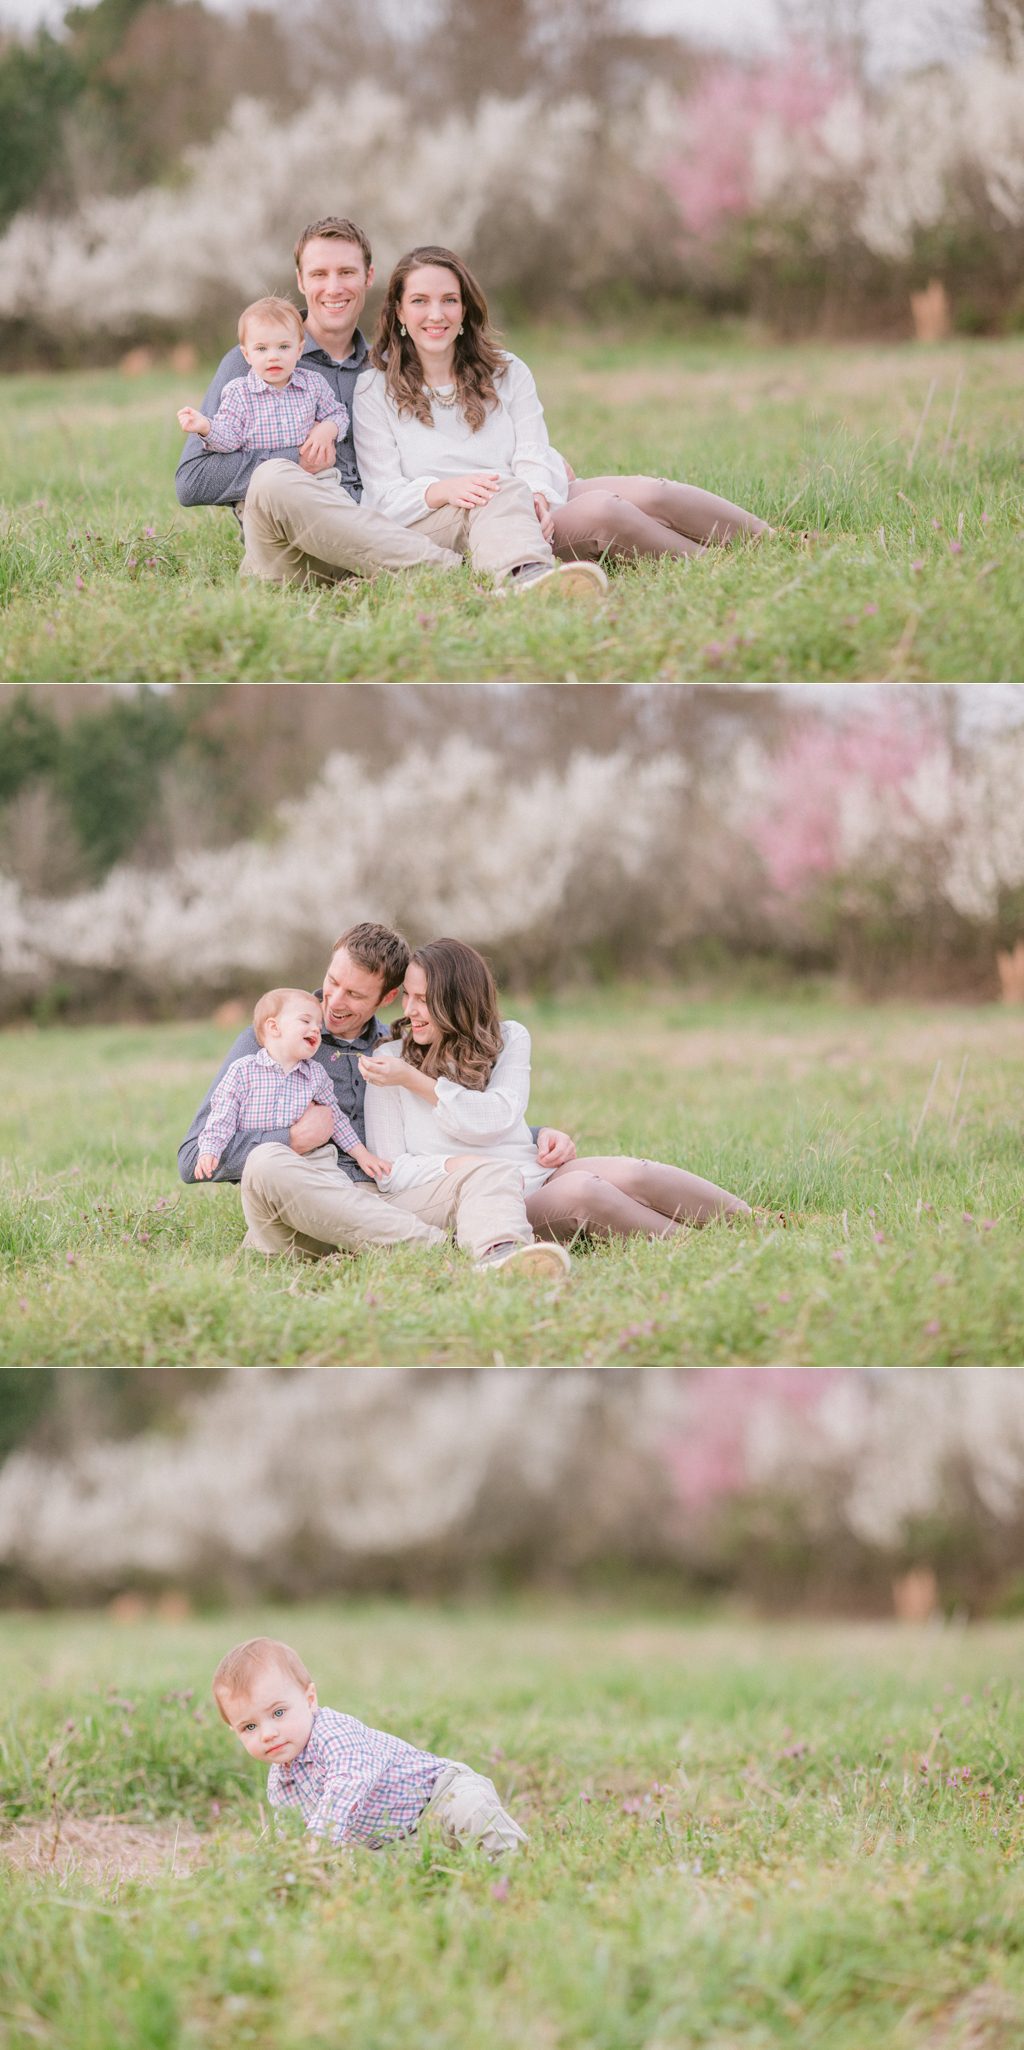 Spring family portraits in Watkinsville, GA with cherry and pear blossoming trees.